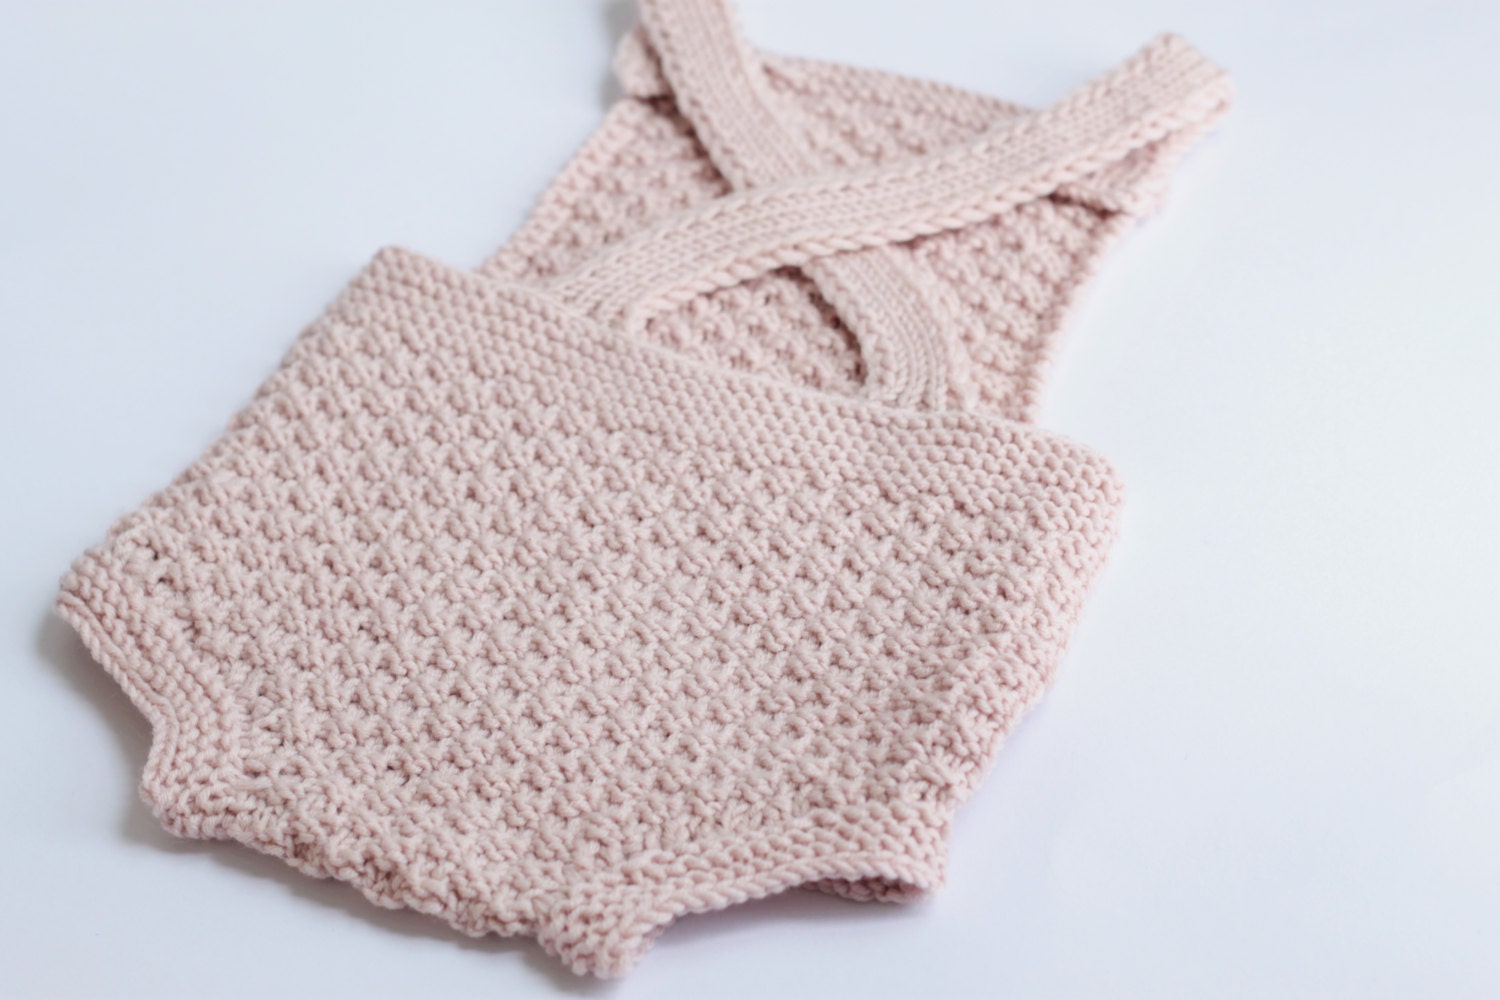 Knitting Patterns For Baby Romper Suits - Mike Nature